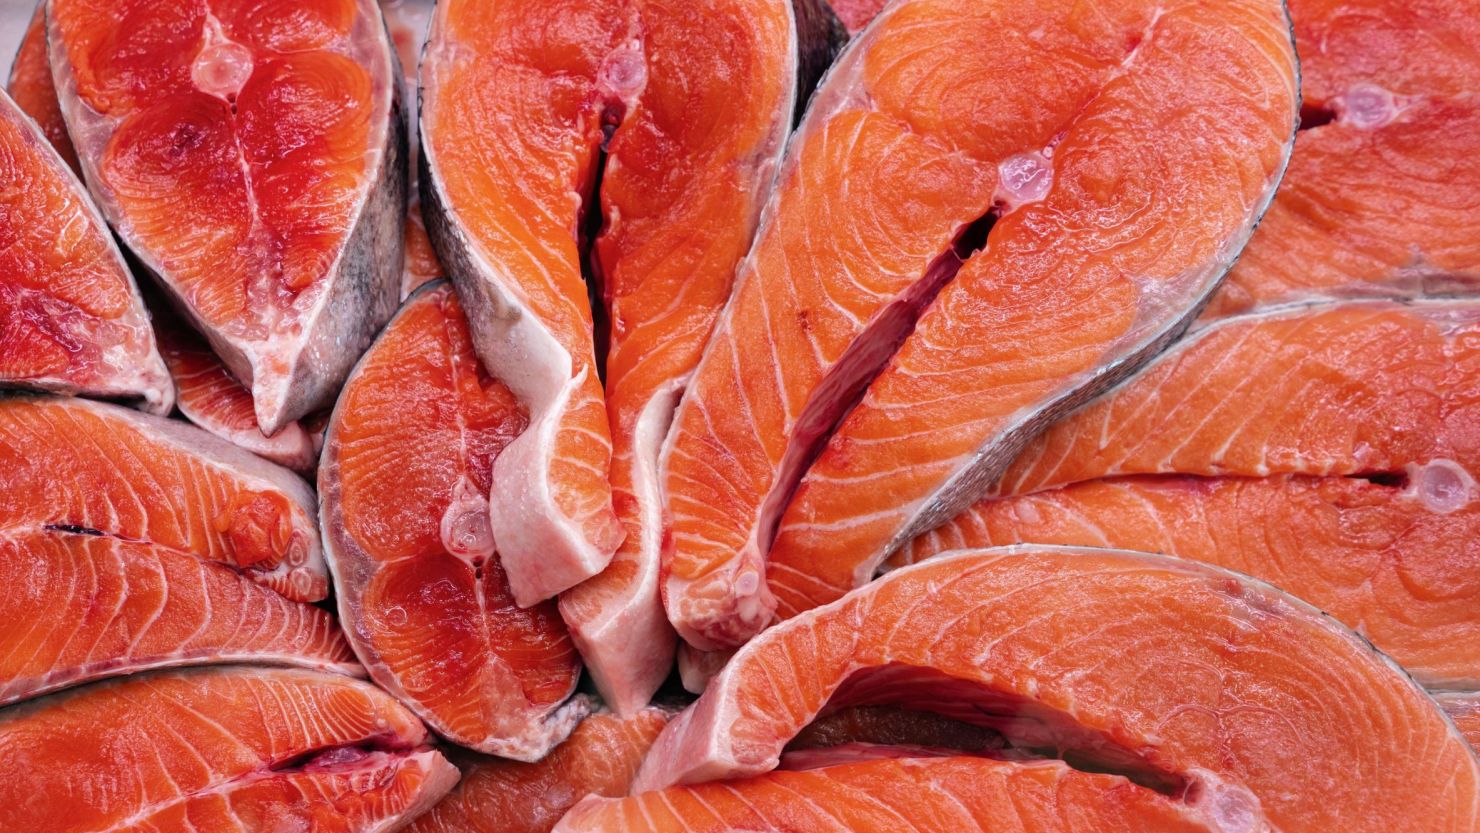 This is the healthiest fish to eat, according to experts